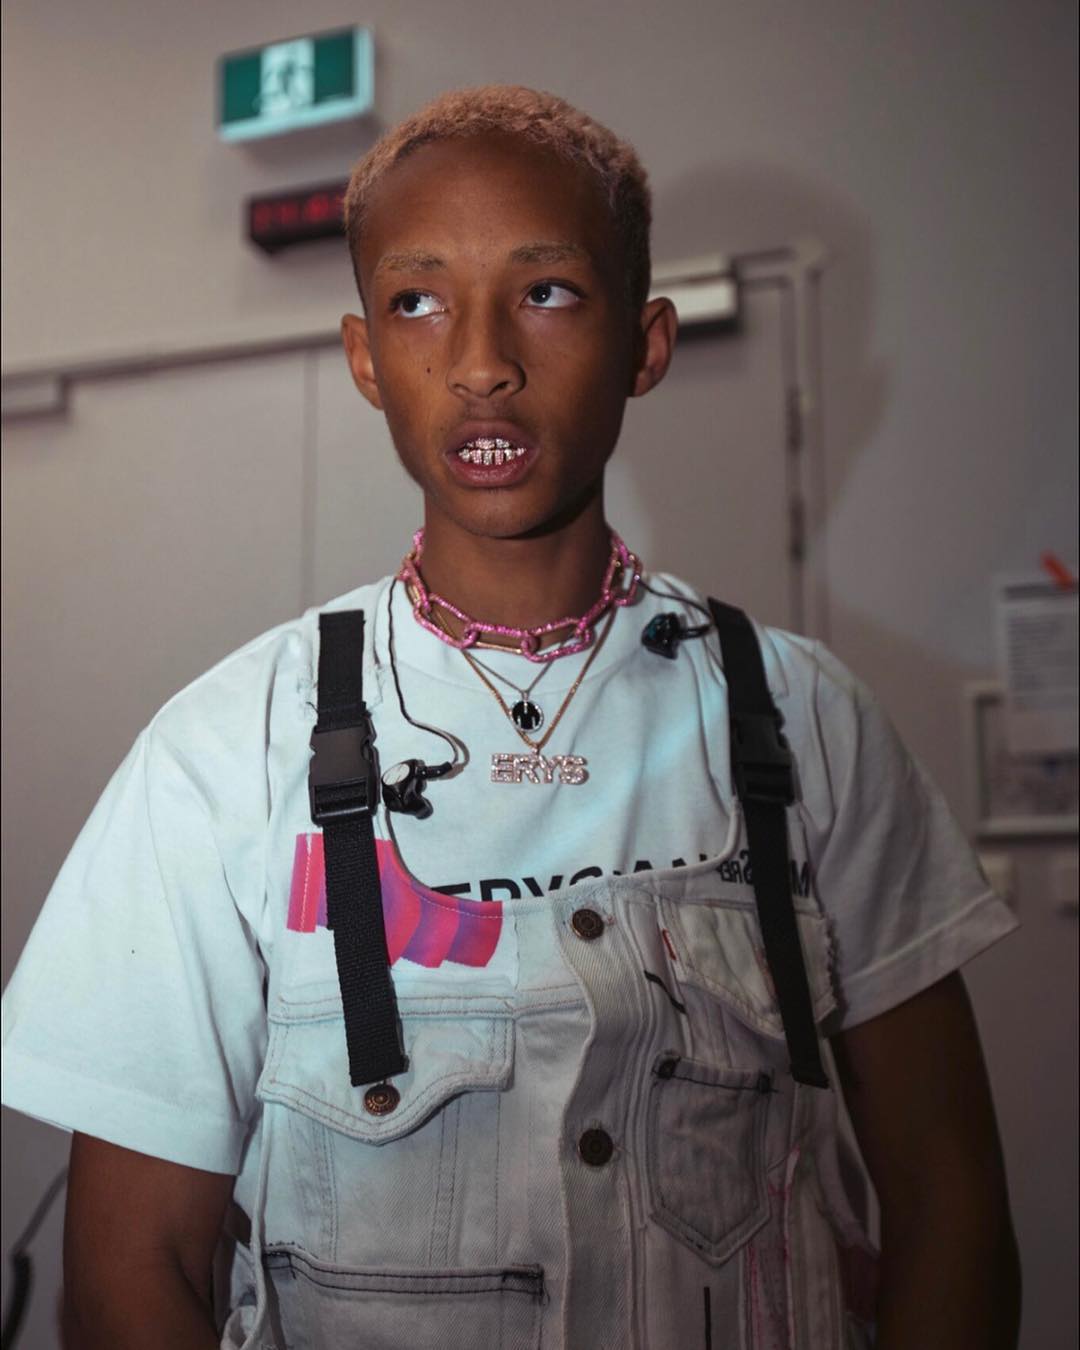 SPOTTED: Jaden Smith Backstage in MSFTSrep & ERYS Necklace – PAUSE 